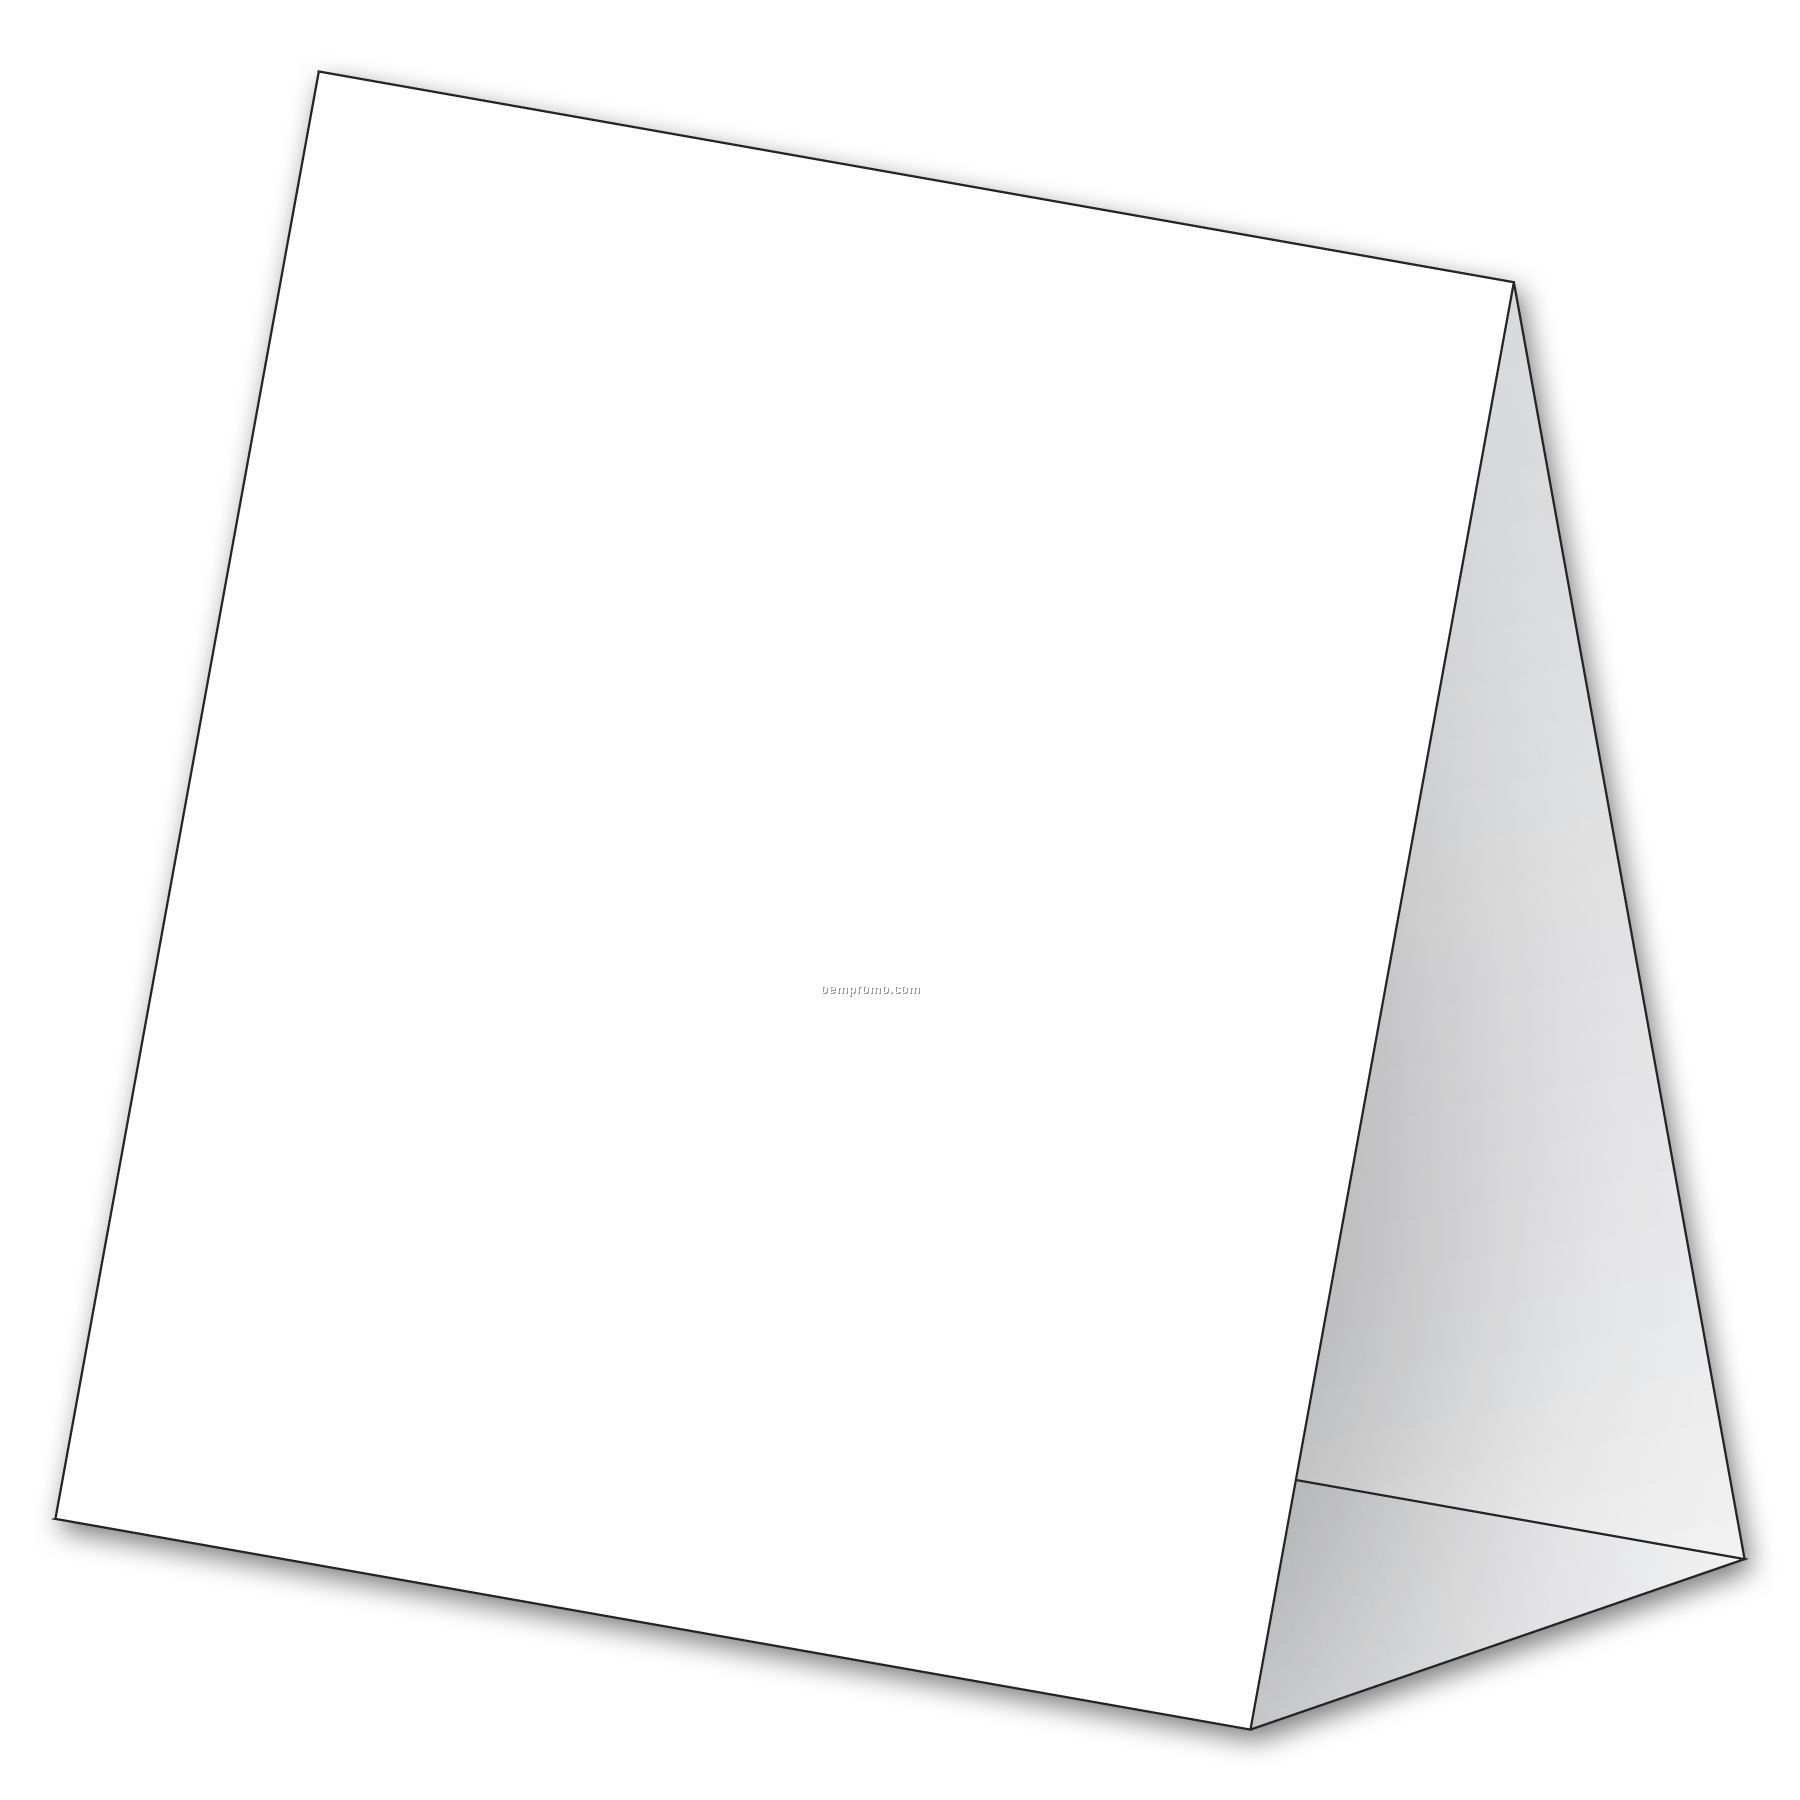 Template For Table Tents from legaldbol.com